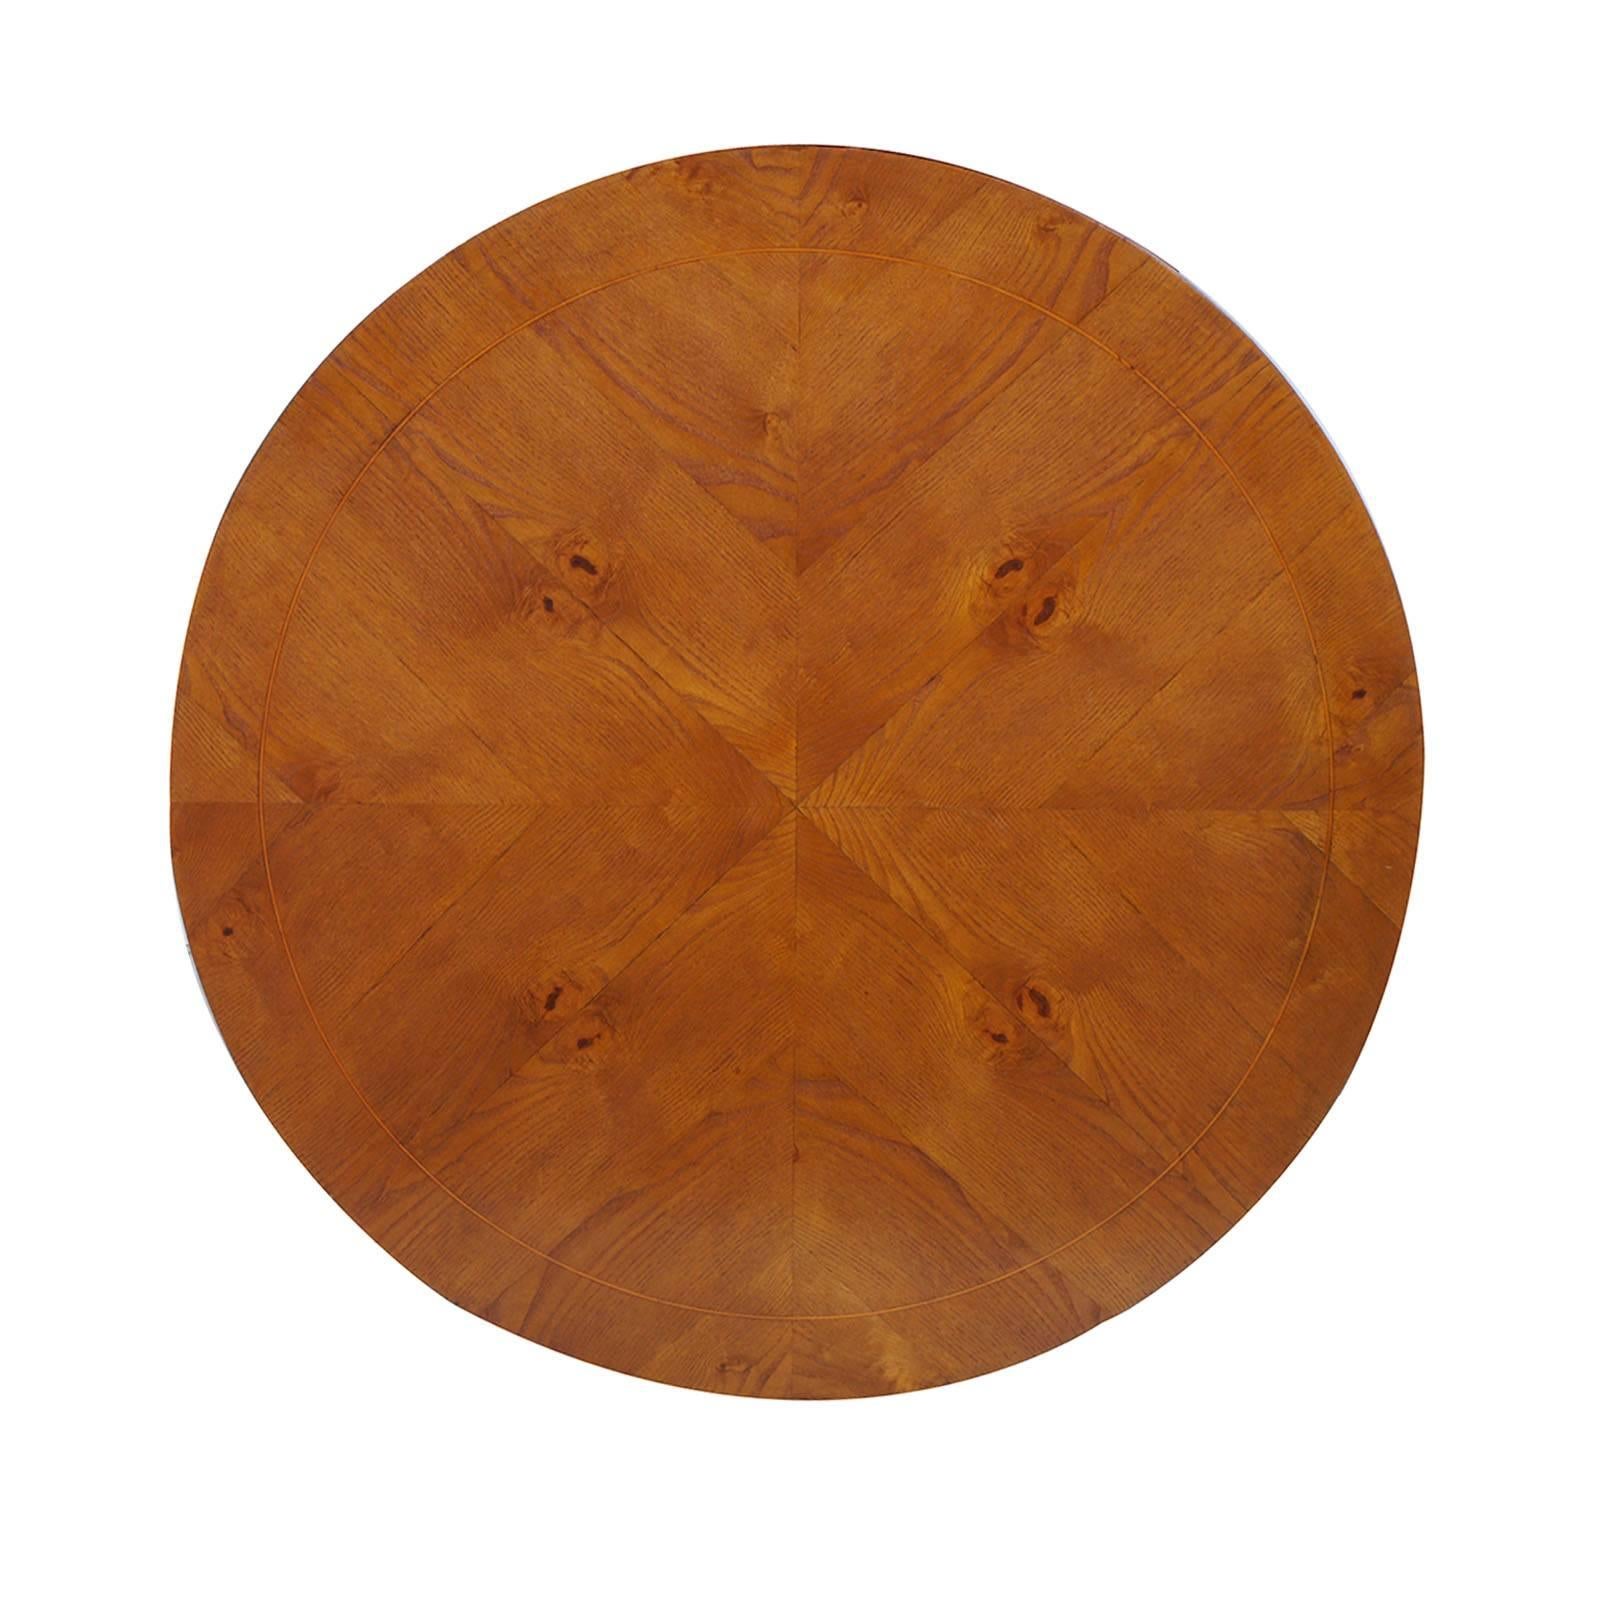 1930s Mid-Century Italian Large round centre table , service coffee table in turned walnut, with top in veneered walnut. Polished with wax.

Measure cm: H 47, Diam 116.
   